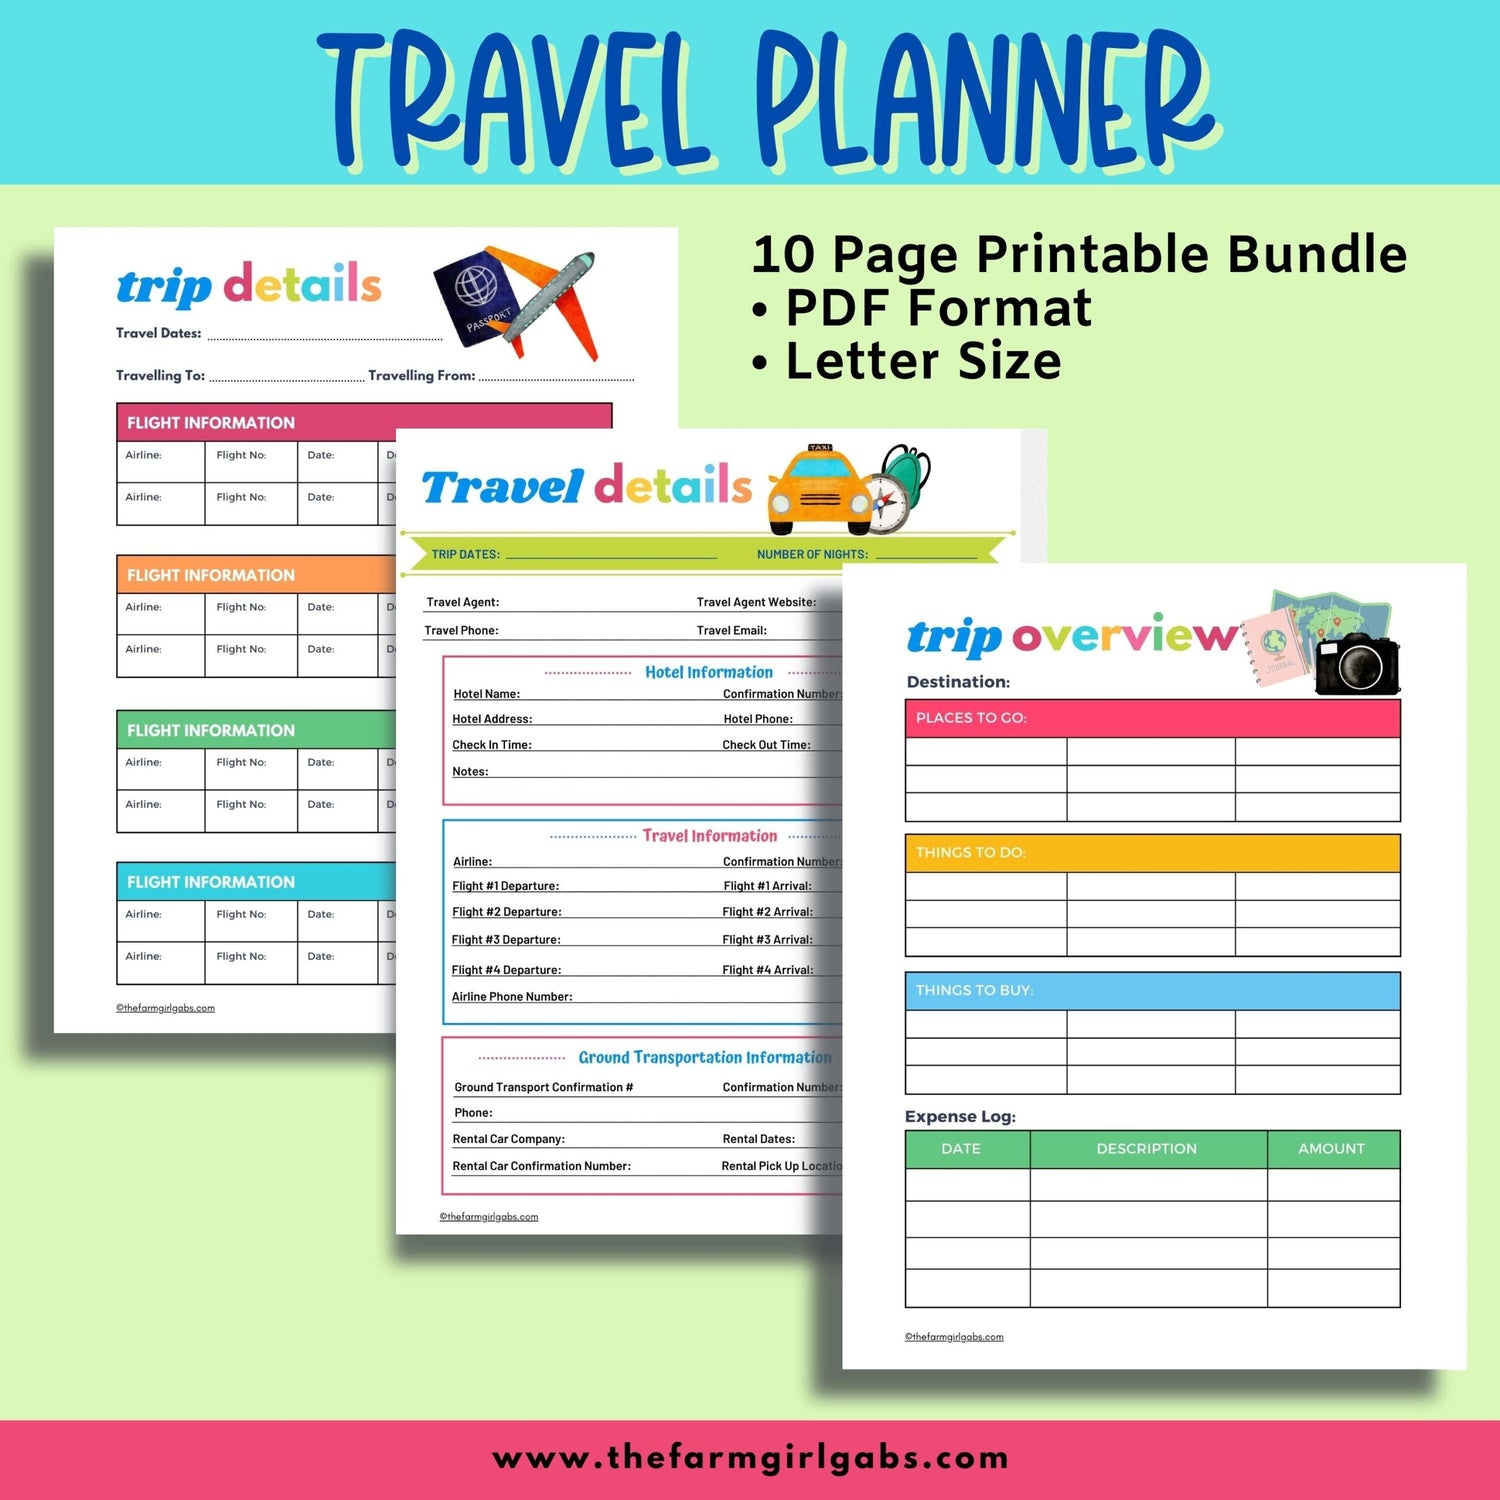 This Printable Family Vacation Travel Planner includes all the vacation planning pages you need to plan your family vacation.